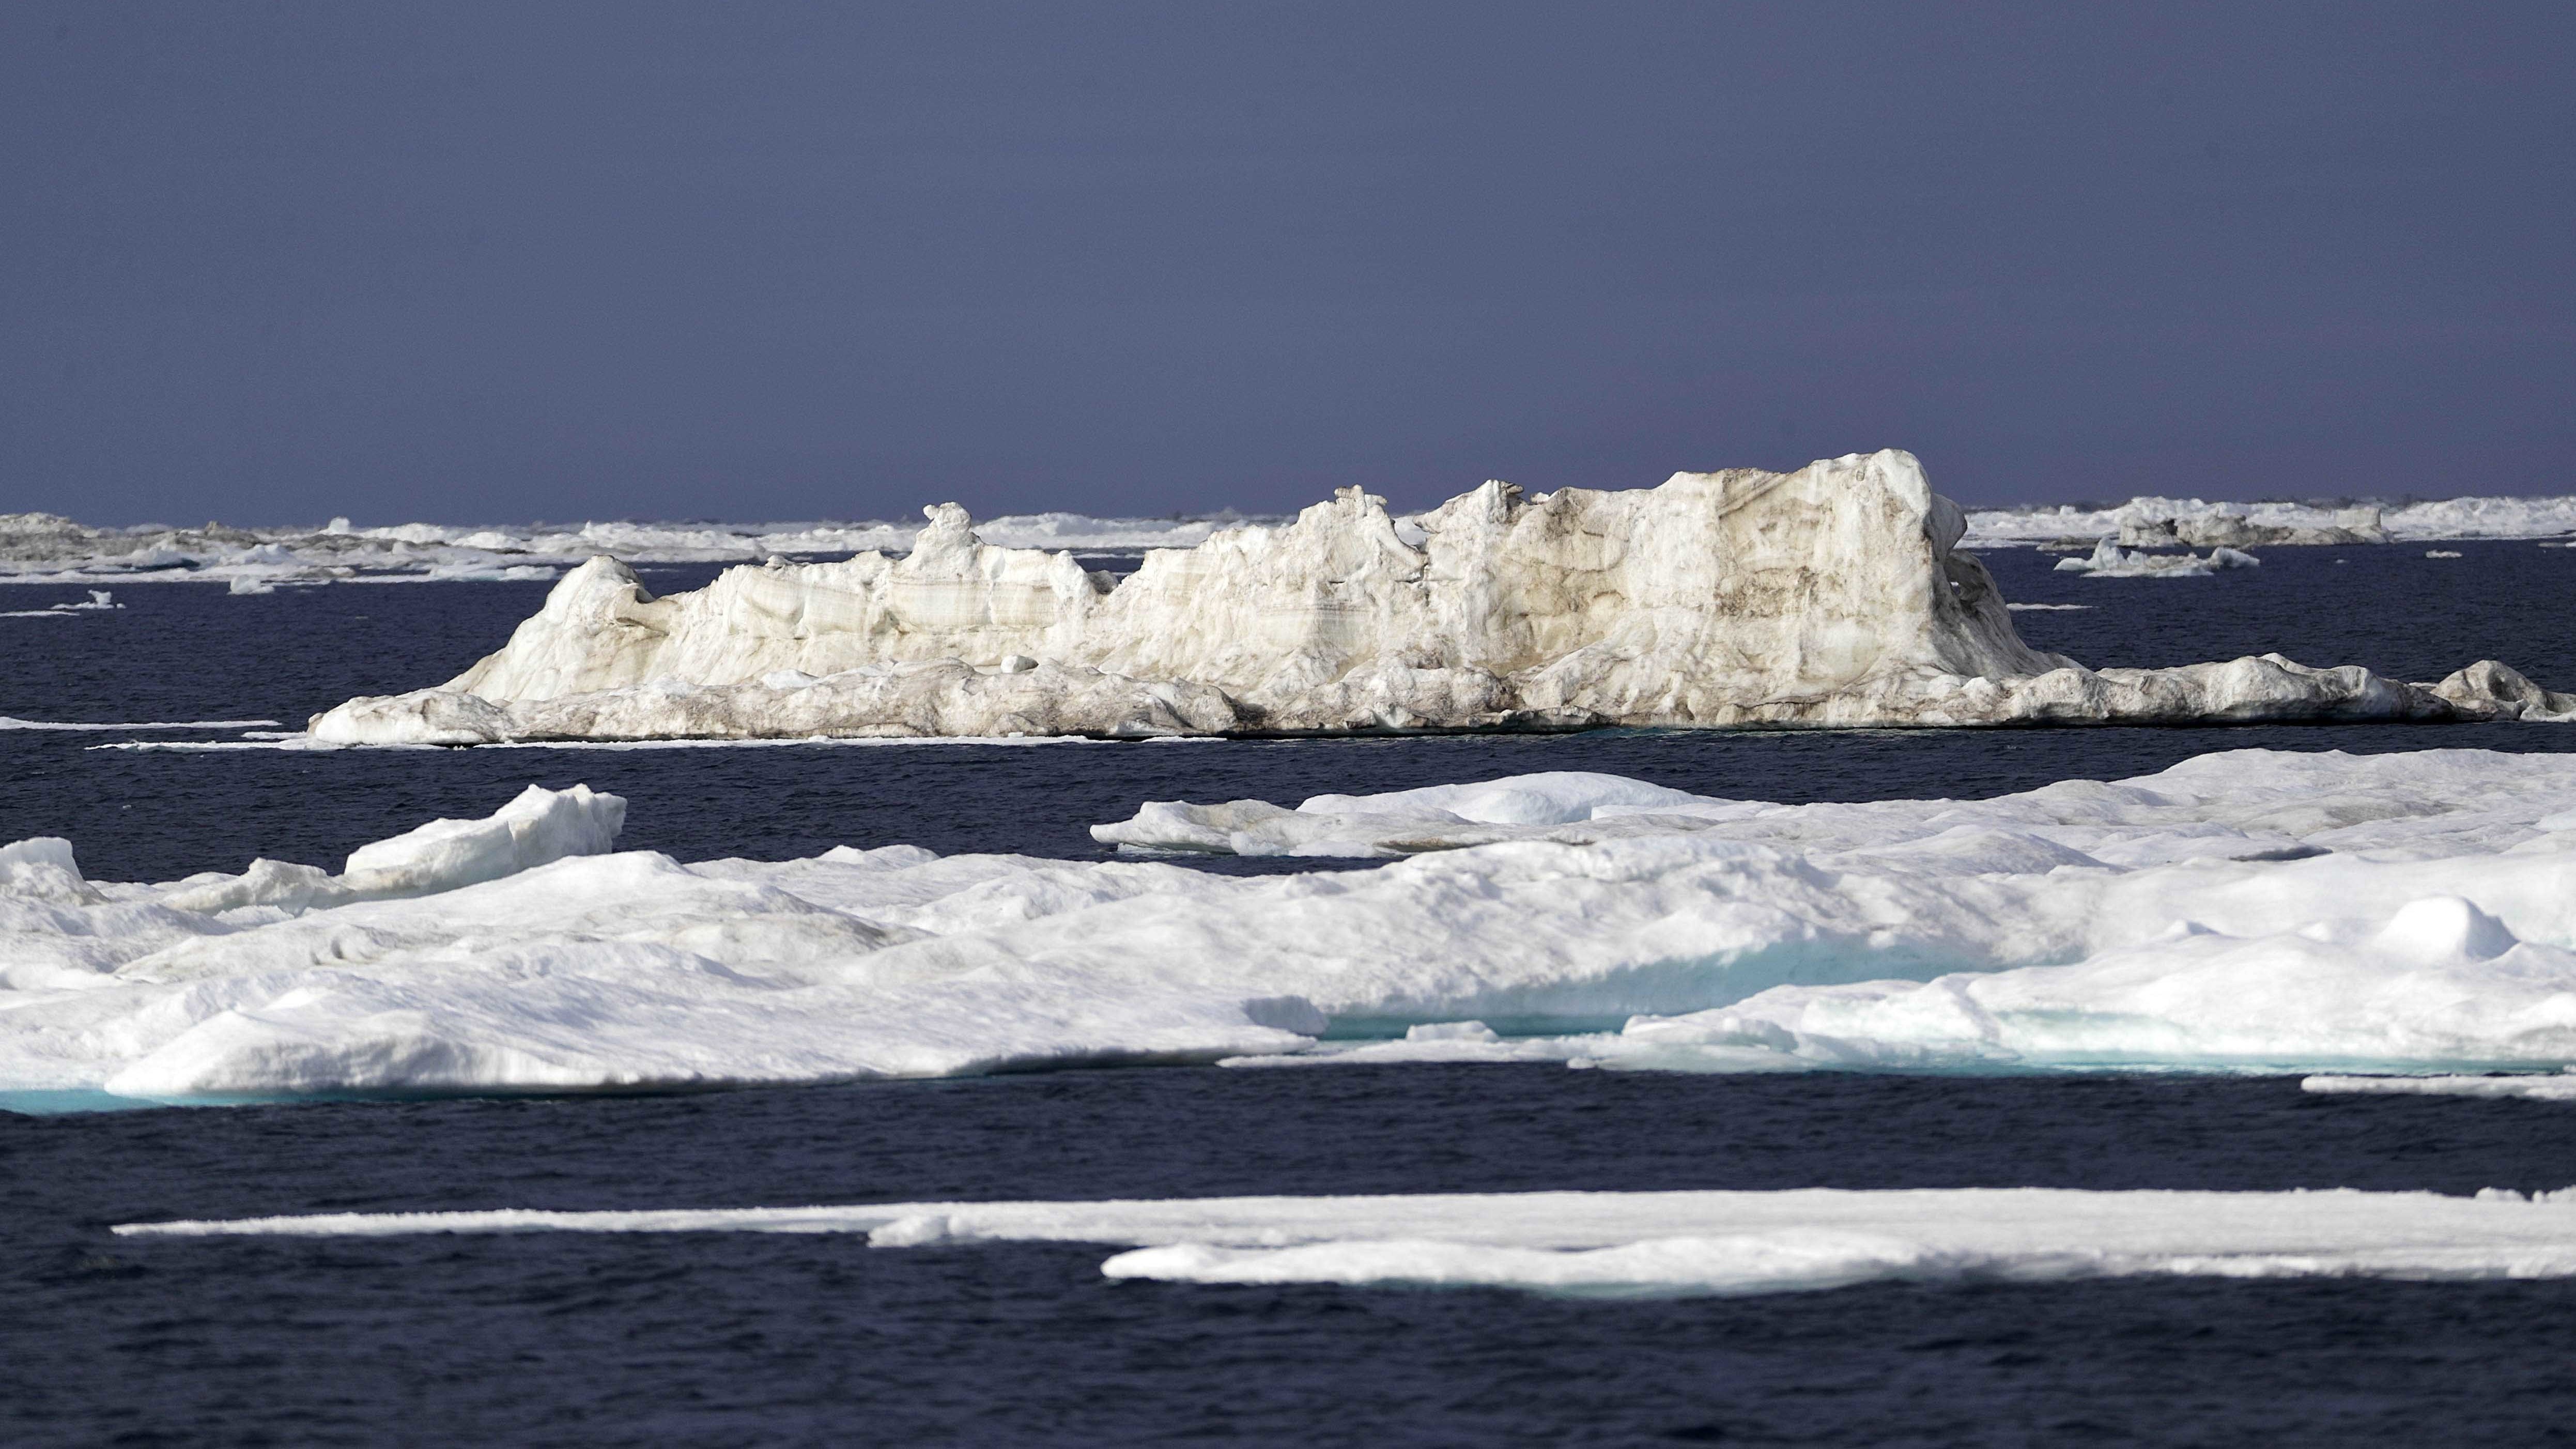 In the Beaufort Sea off the coast of Alaska, global warming is melting sea ice and glaciers at an historic rate.